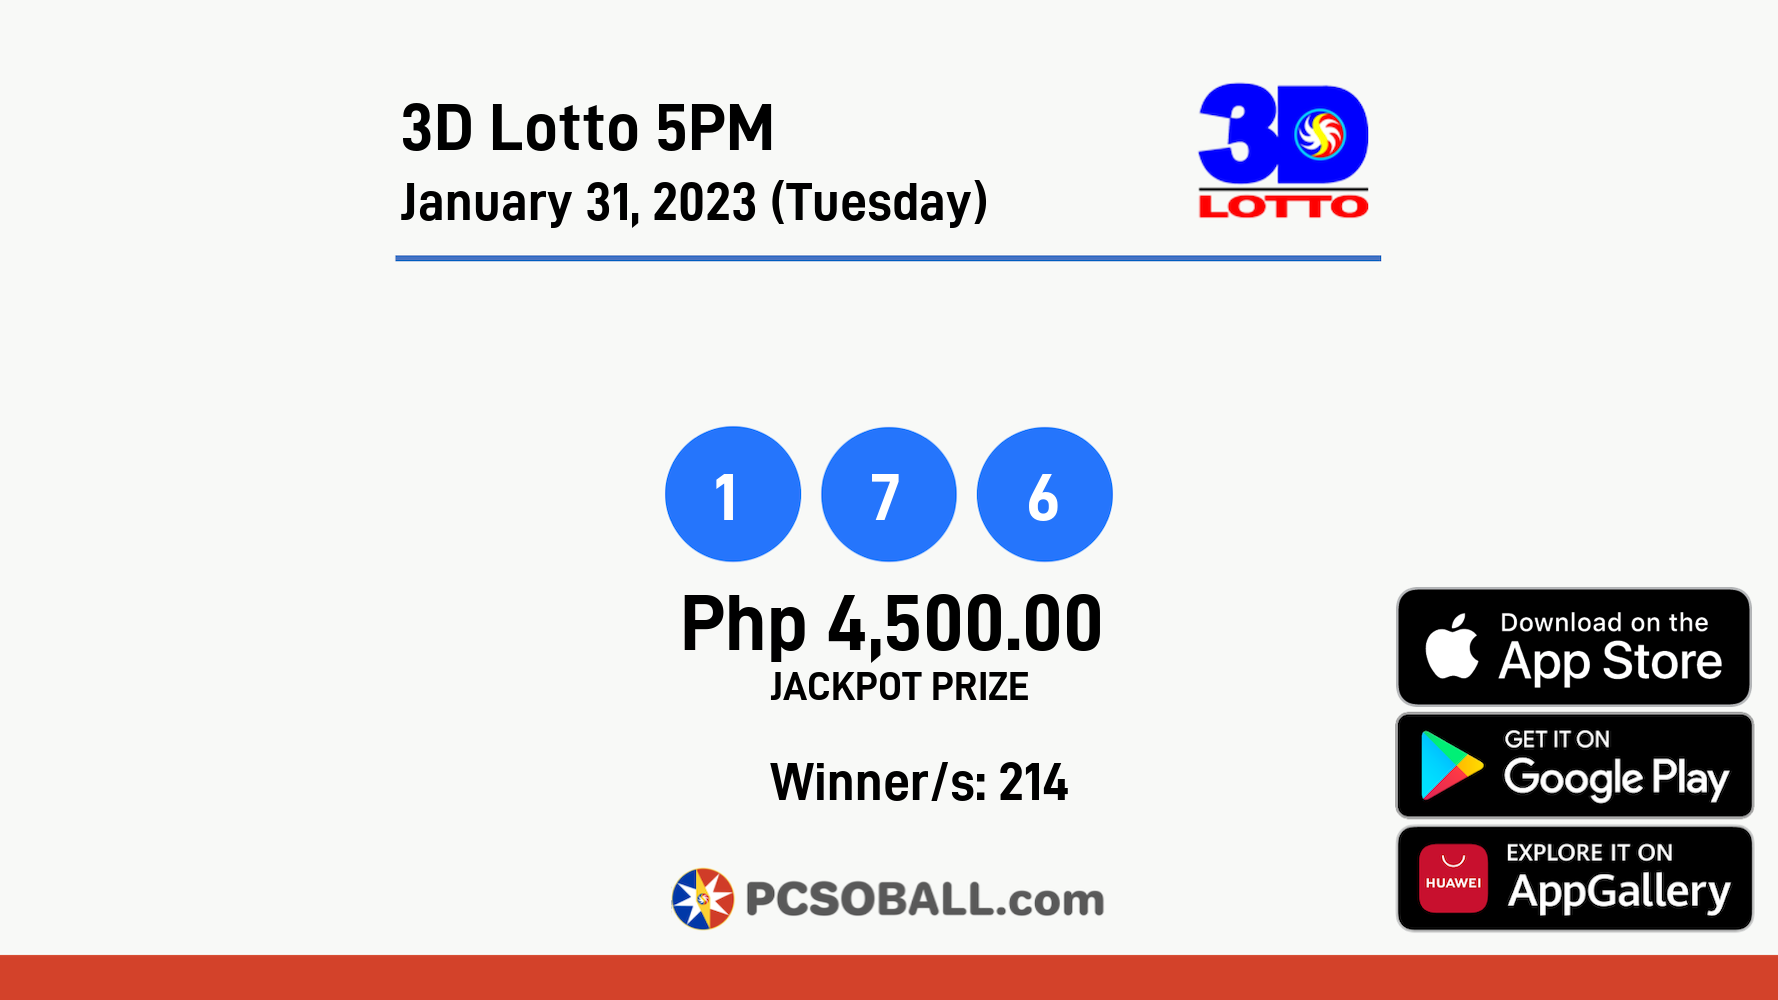 3D Lotto 5PM January 31, 2023 (Tuesday) Result